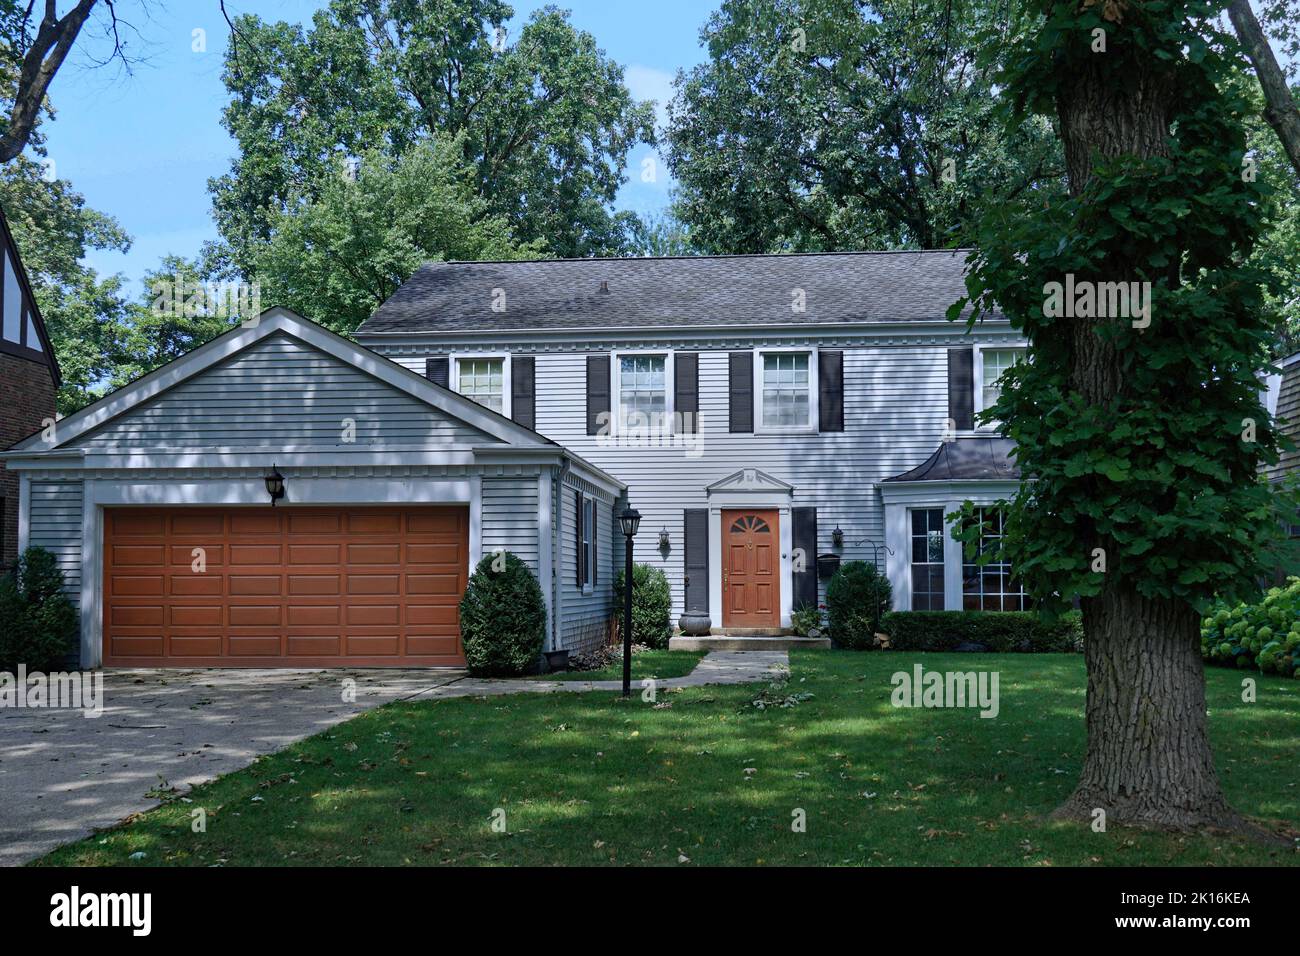 Traditional two story detached suburban house with two car garage Stock Photo